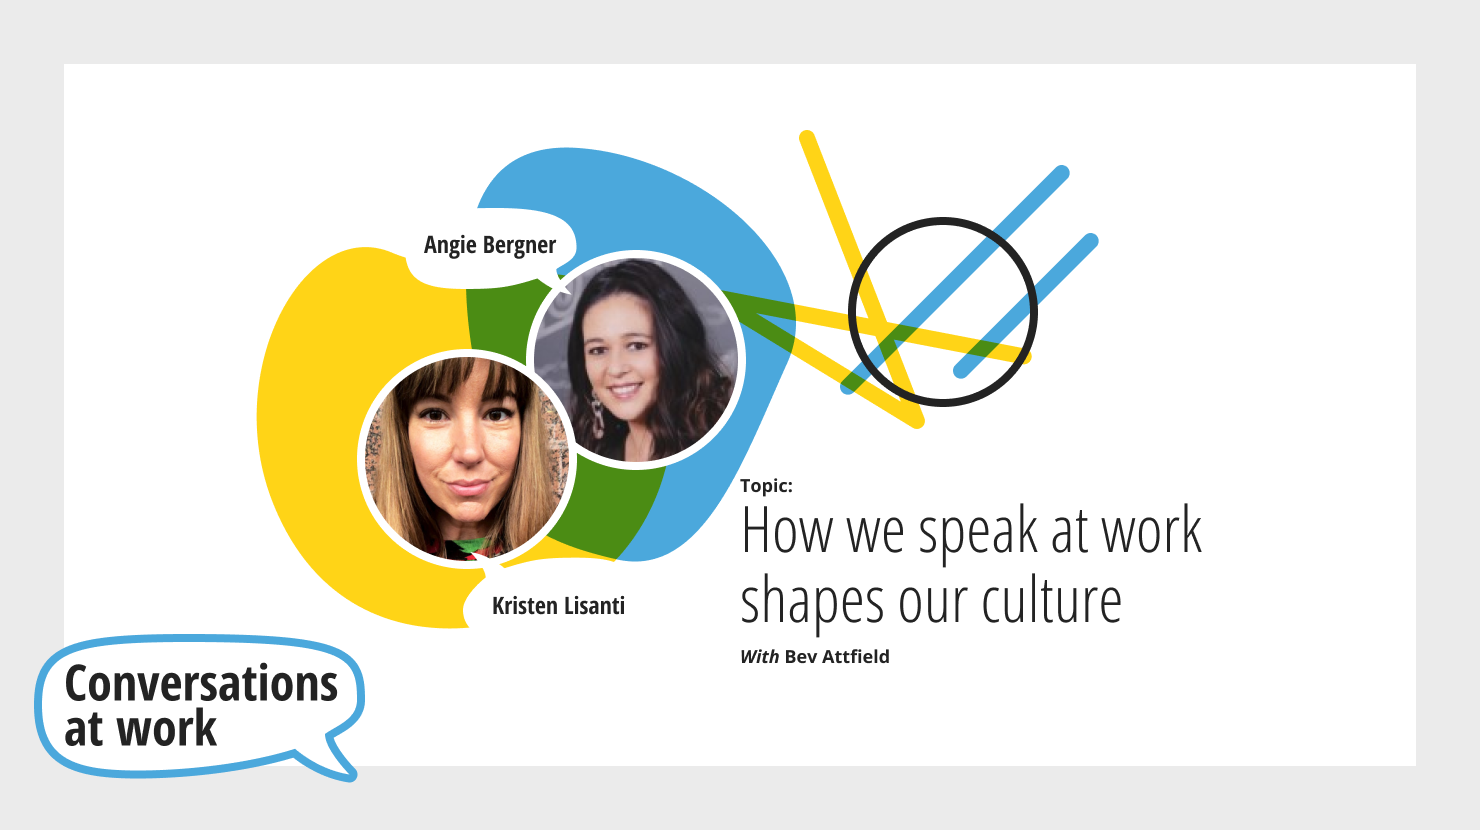 How we talk at work shapes our culture